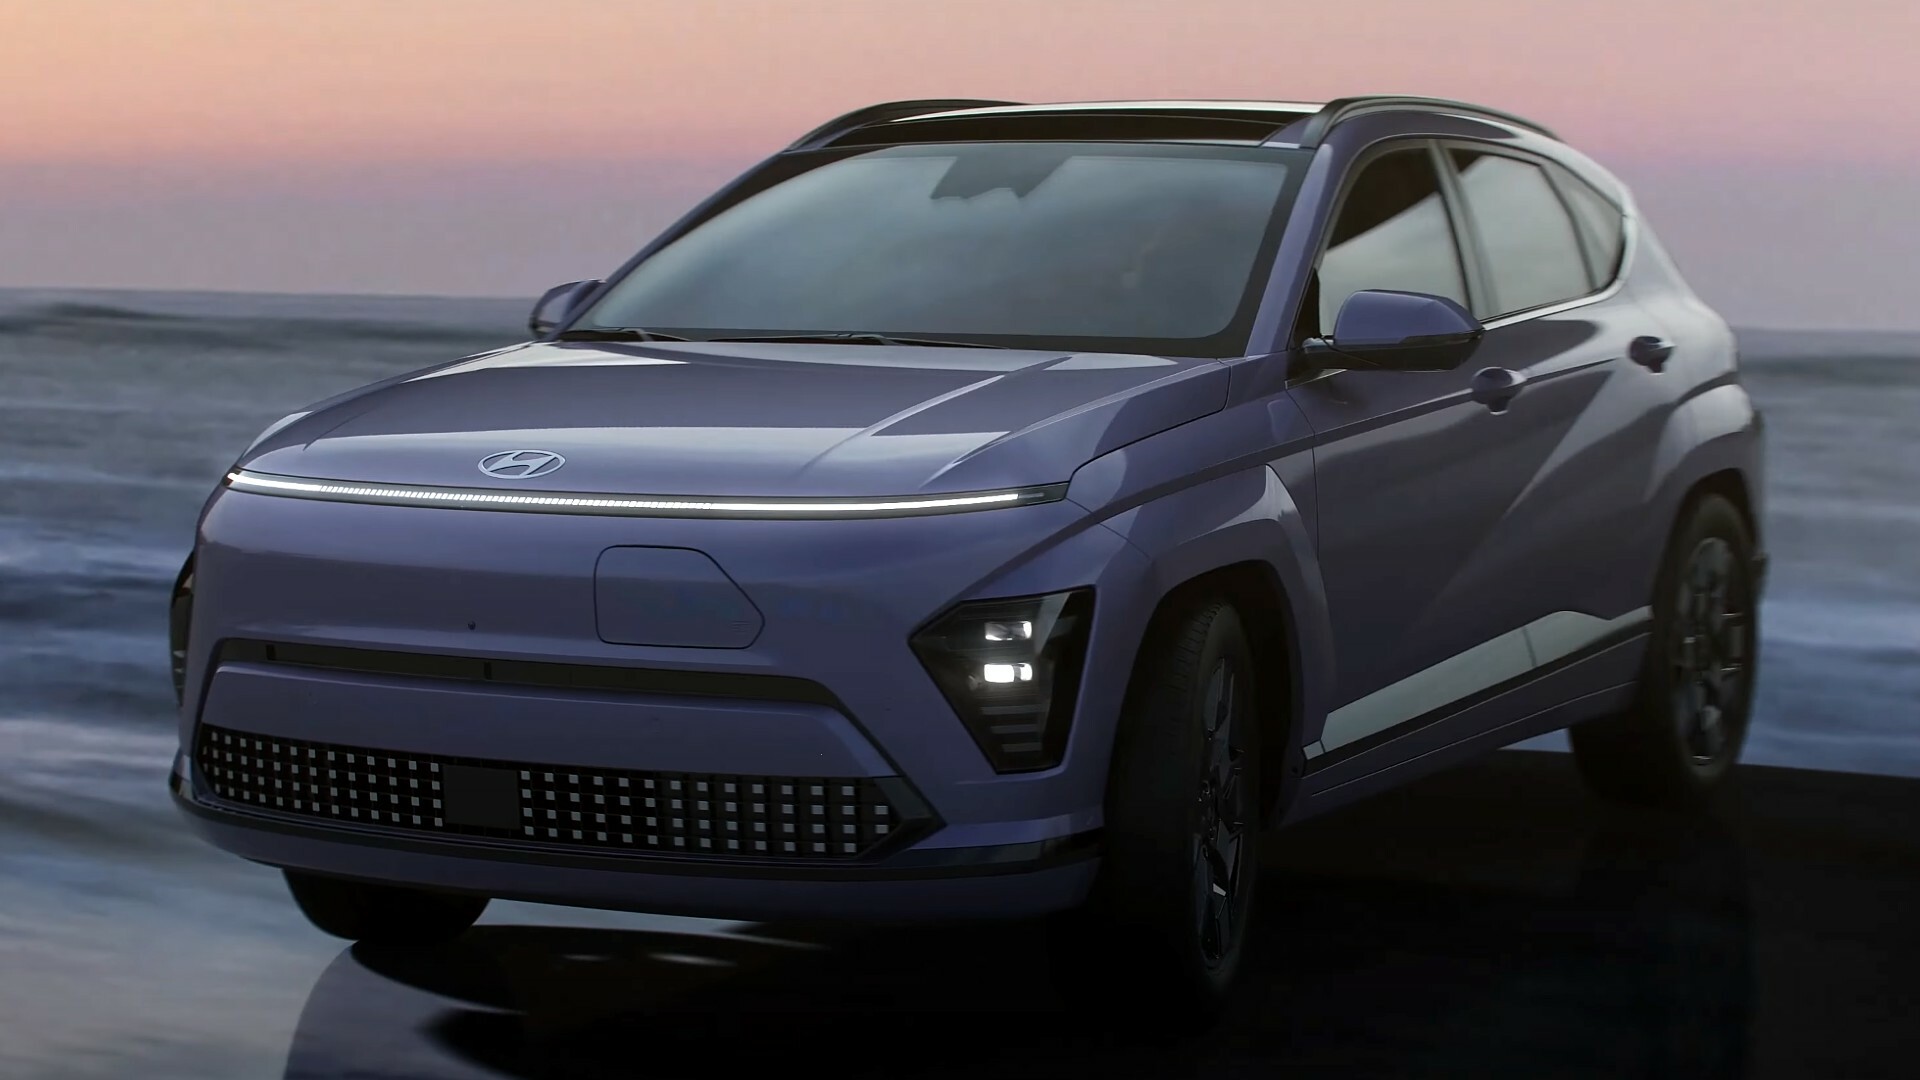 Here's A Closer Look At The New Hyundai Kona Electric